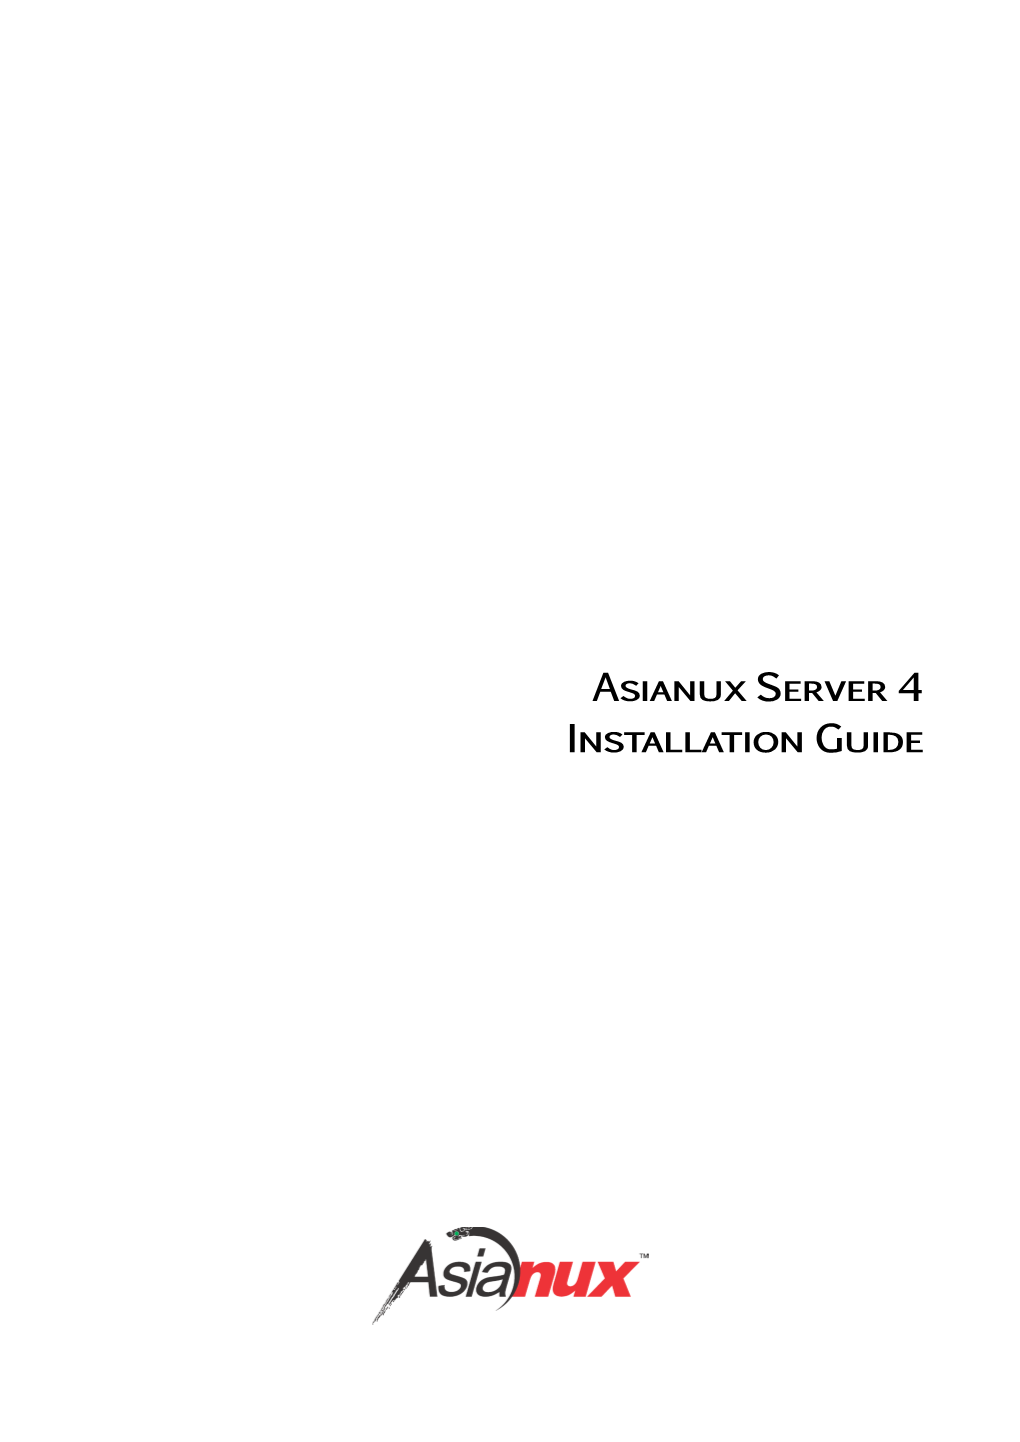 Asianux Server 4 Installation Guide Asianux Server 4 Installation Guide